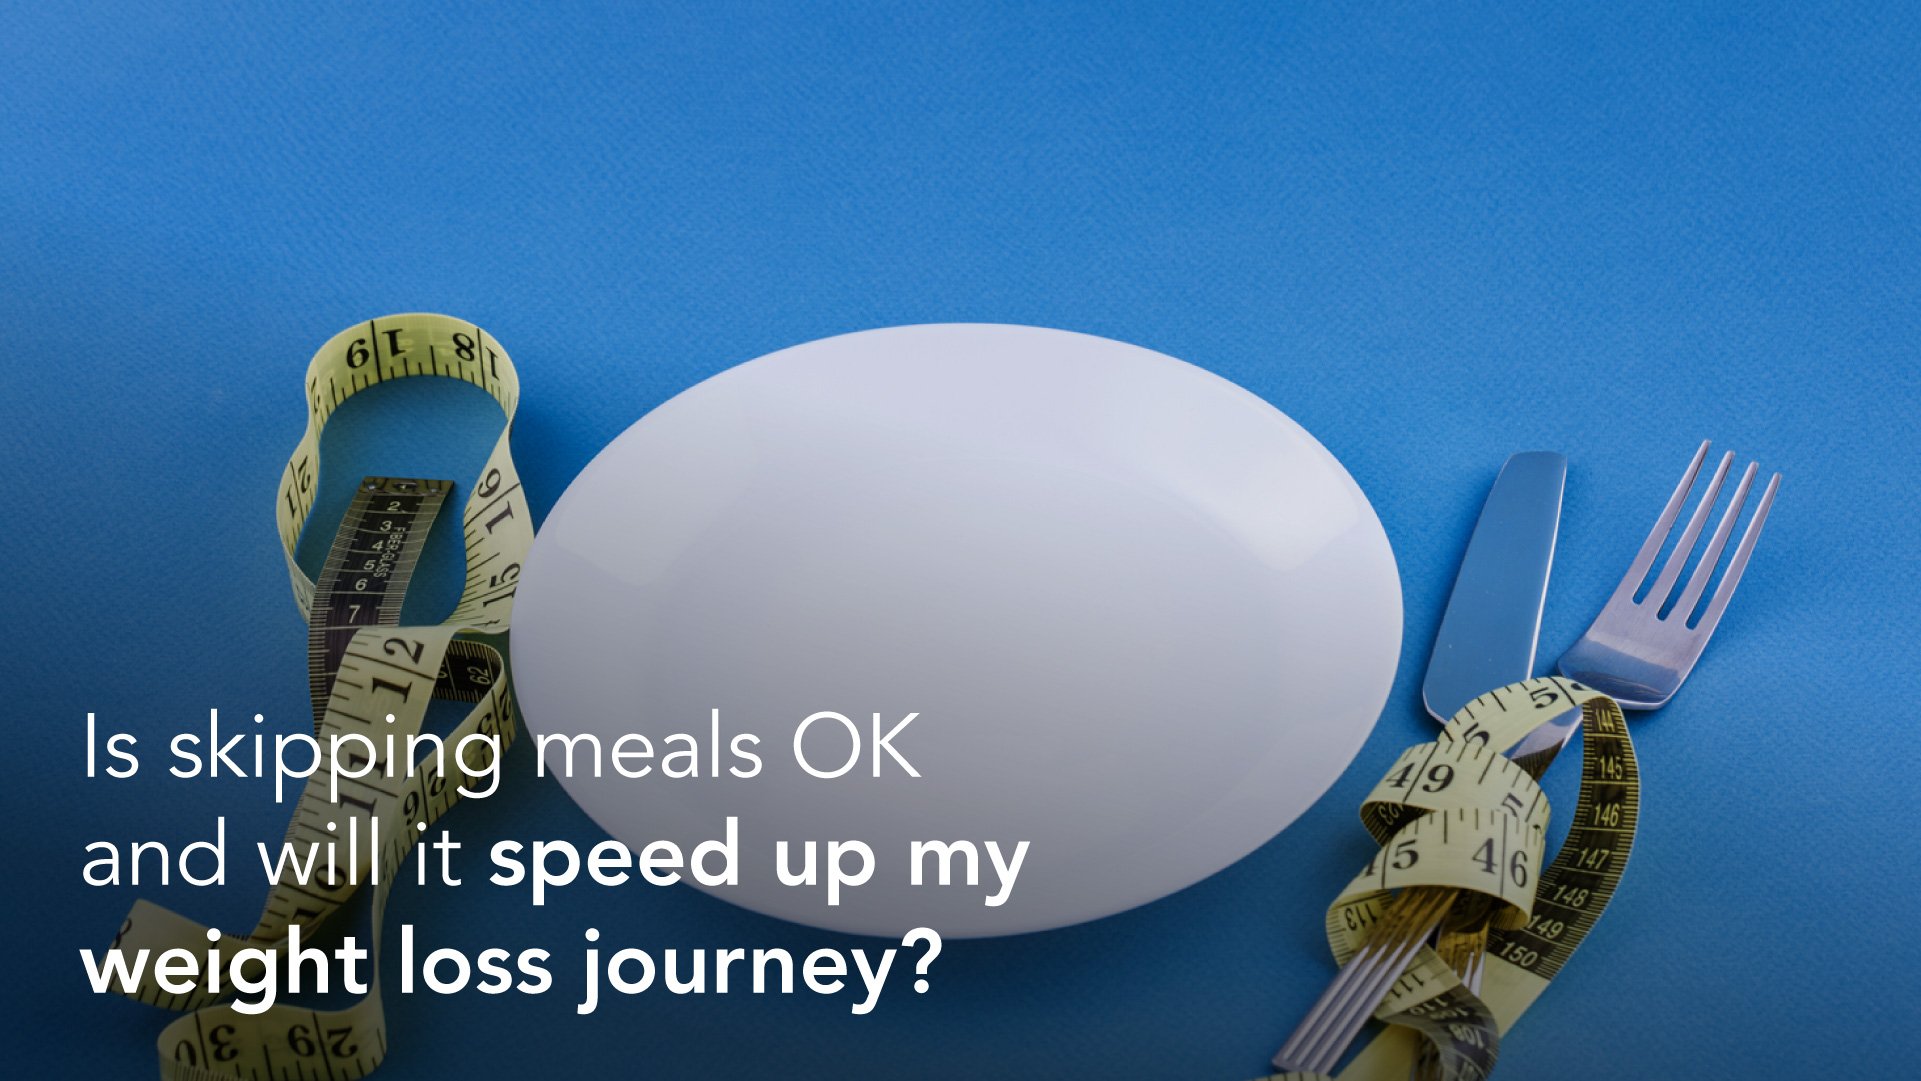 Is skipping meals OK and will it speed up my weight loss journey?